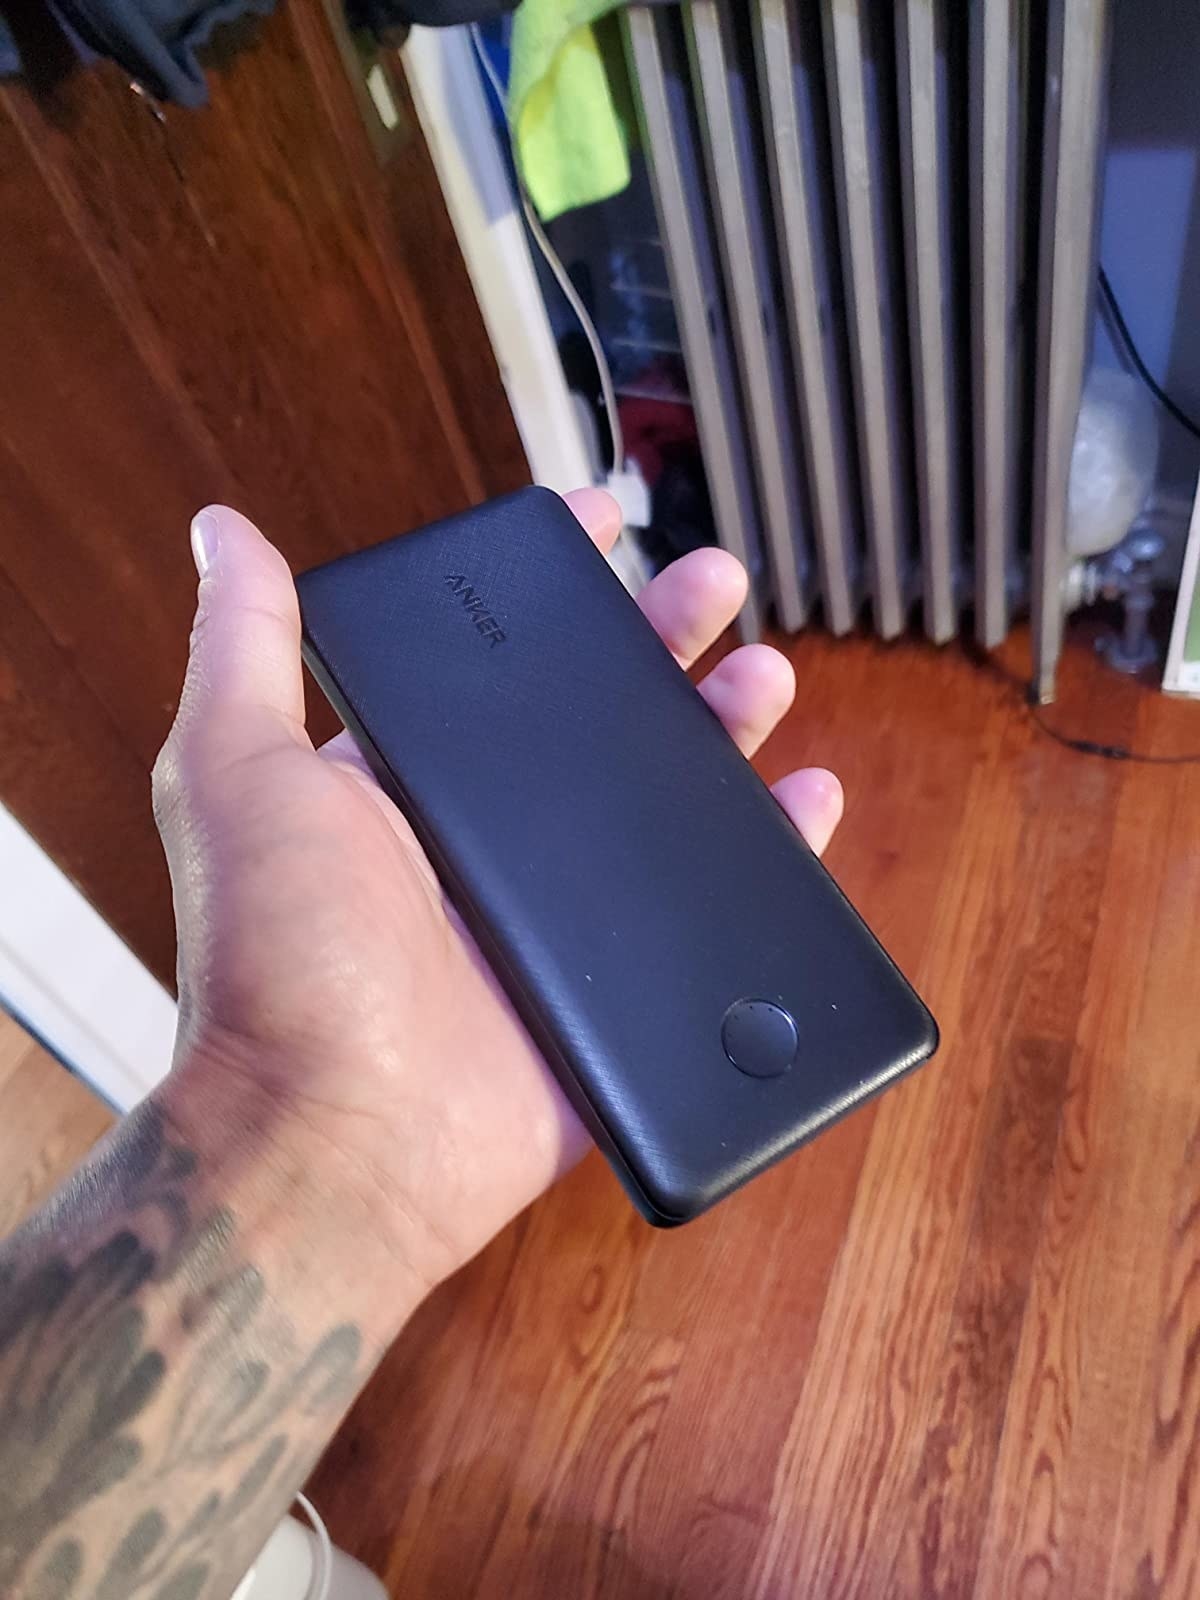 reviewer holding the black power bank, which is about the size of an iPhone